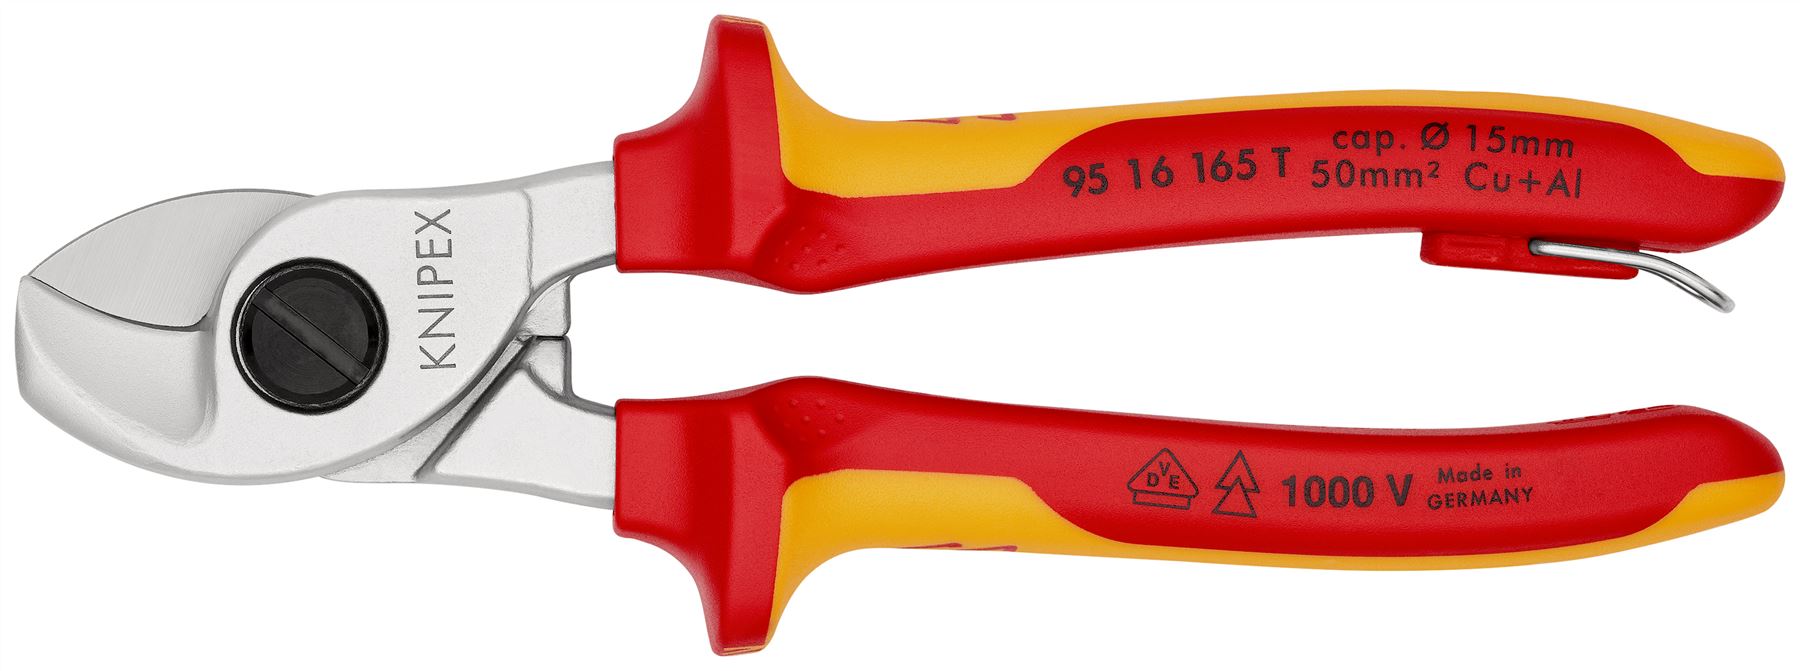 Knipex Cable Shears 165mm VDE Insulated 1000V with Tether Point 95 16 165 T